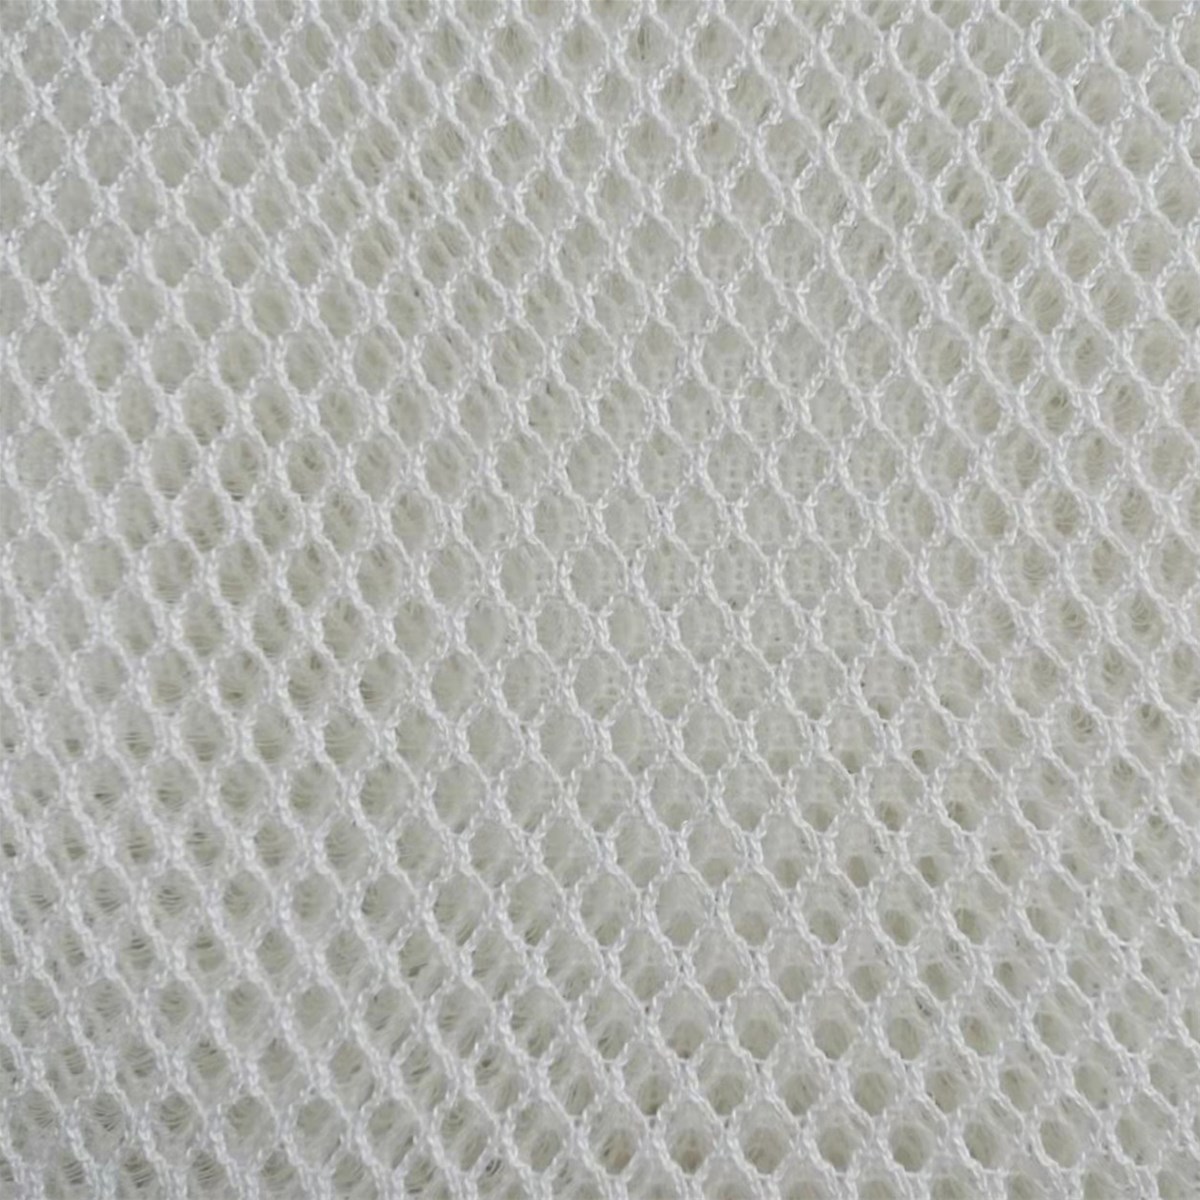 Antimoisture Mattress Ventiated Underlay by Breathable and Washable 3D Spacer Air Mesh Fabric